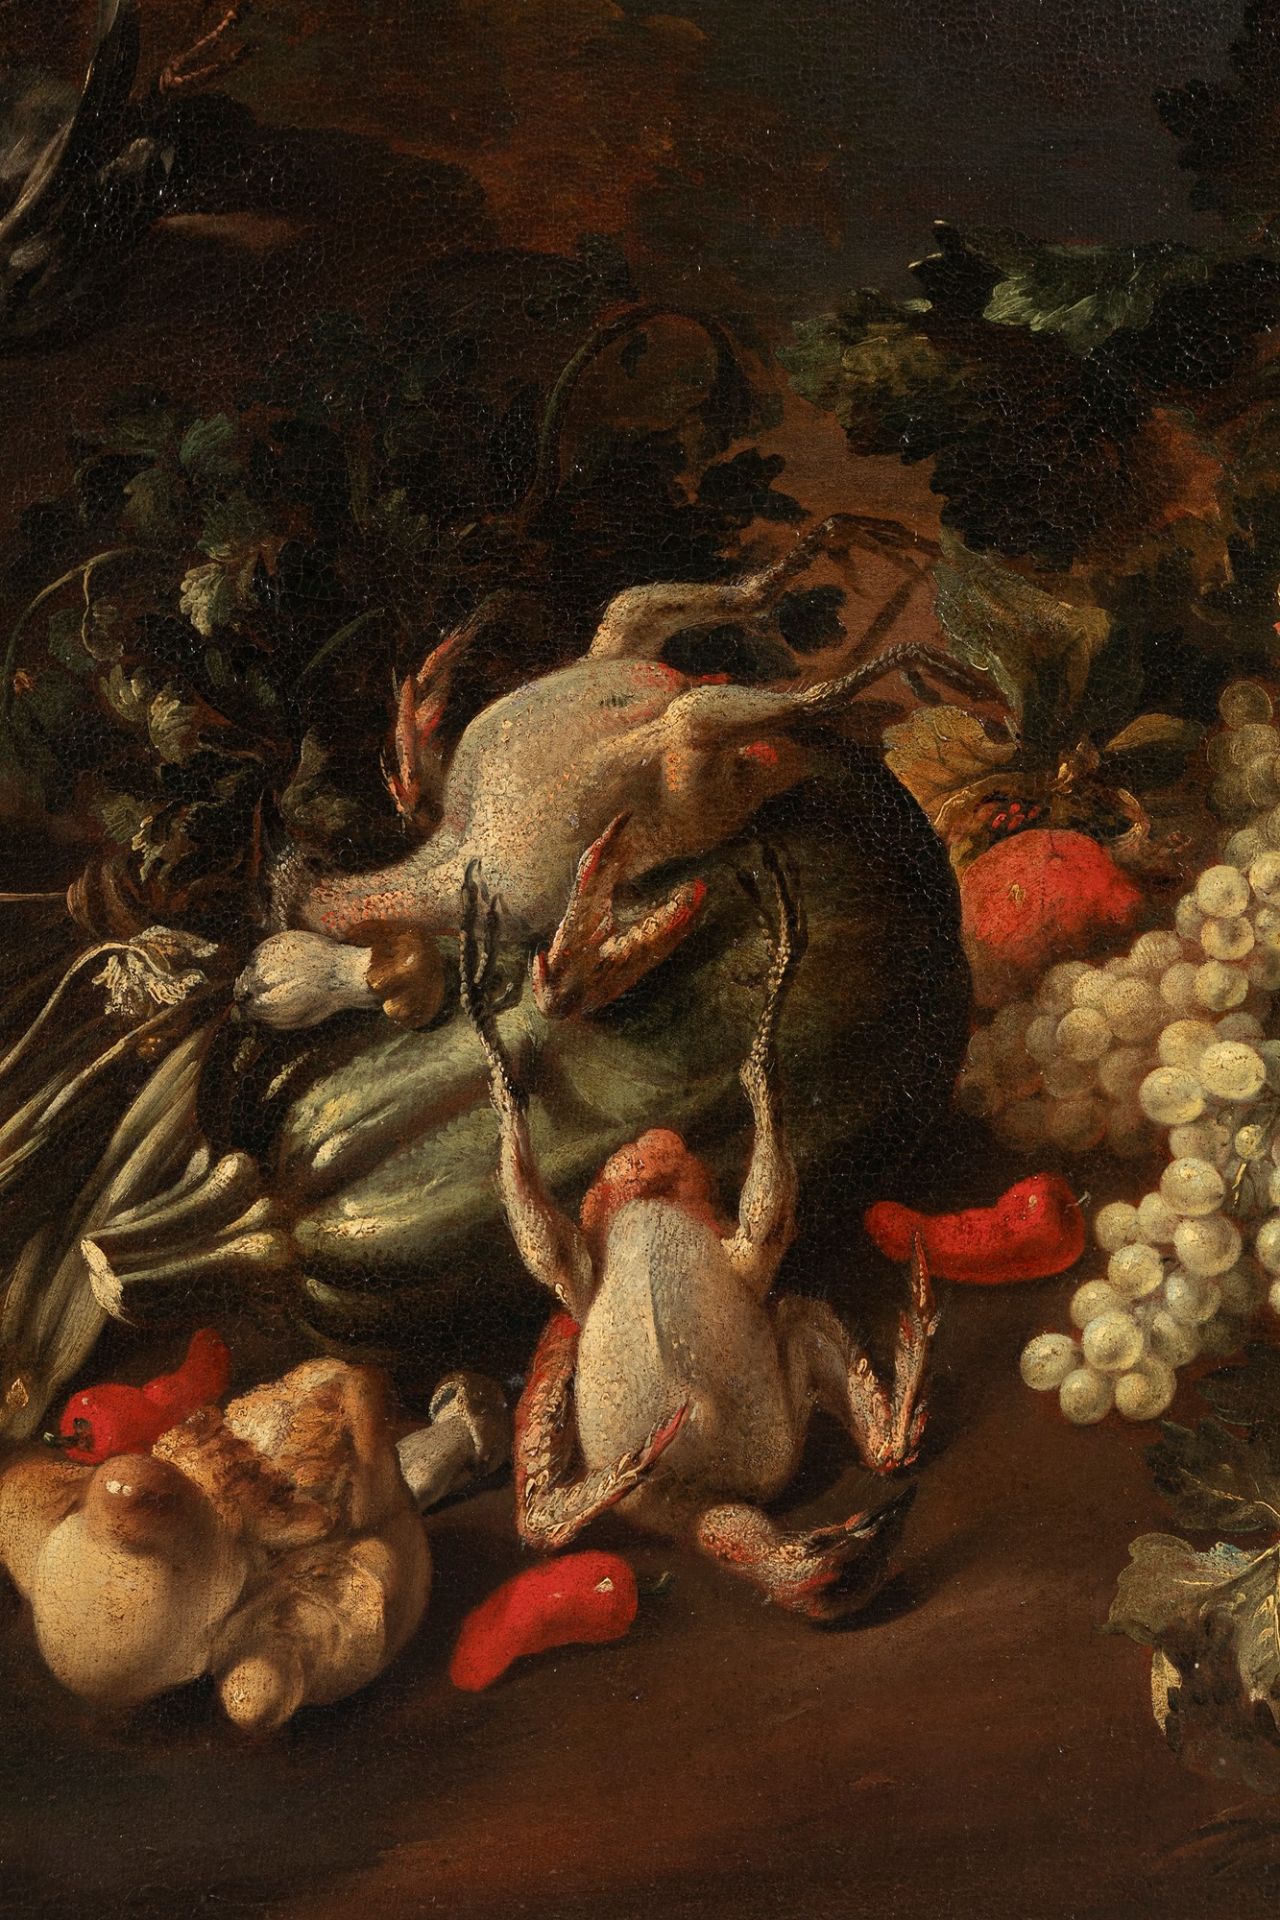 Felice Boselli (Piacenza 1650-Parma 1732) - Game, fruits and vegetables - Image 3 of 7